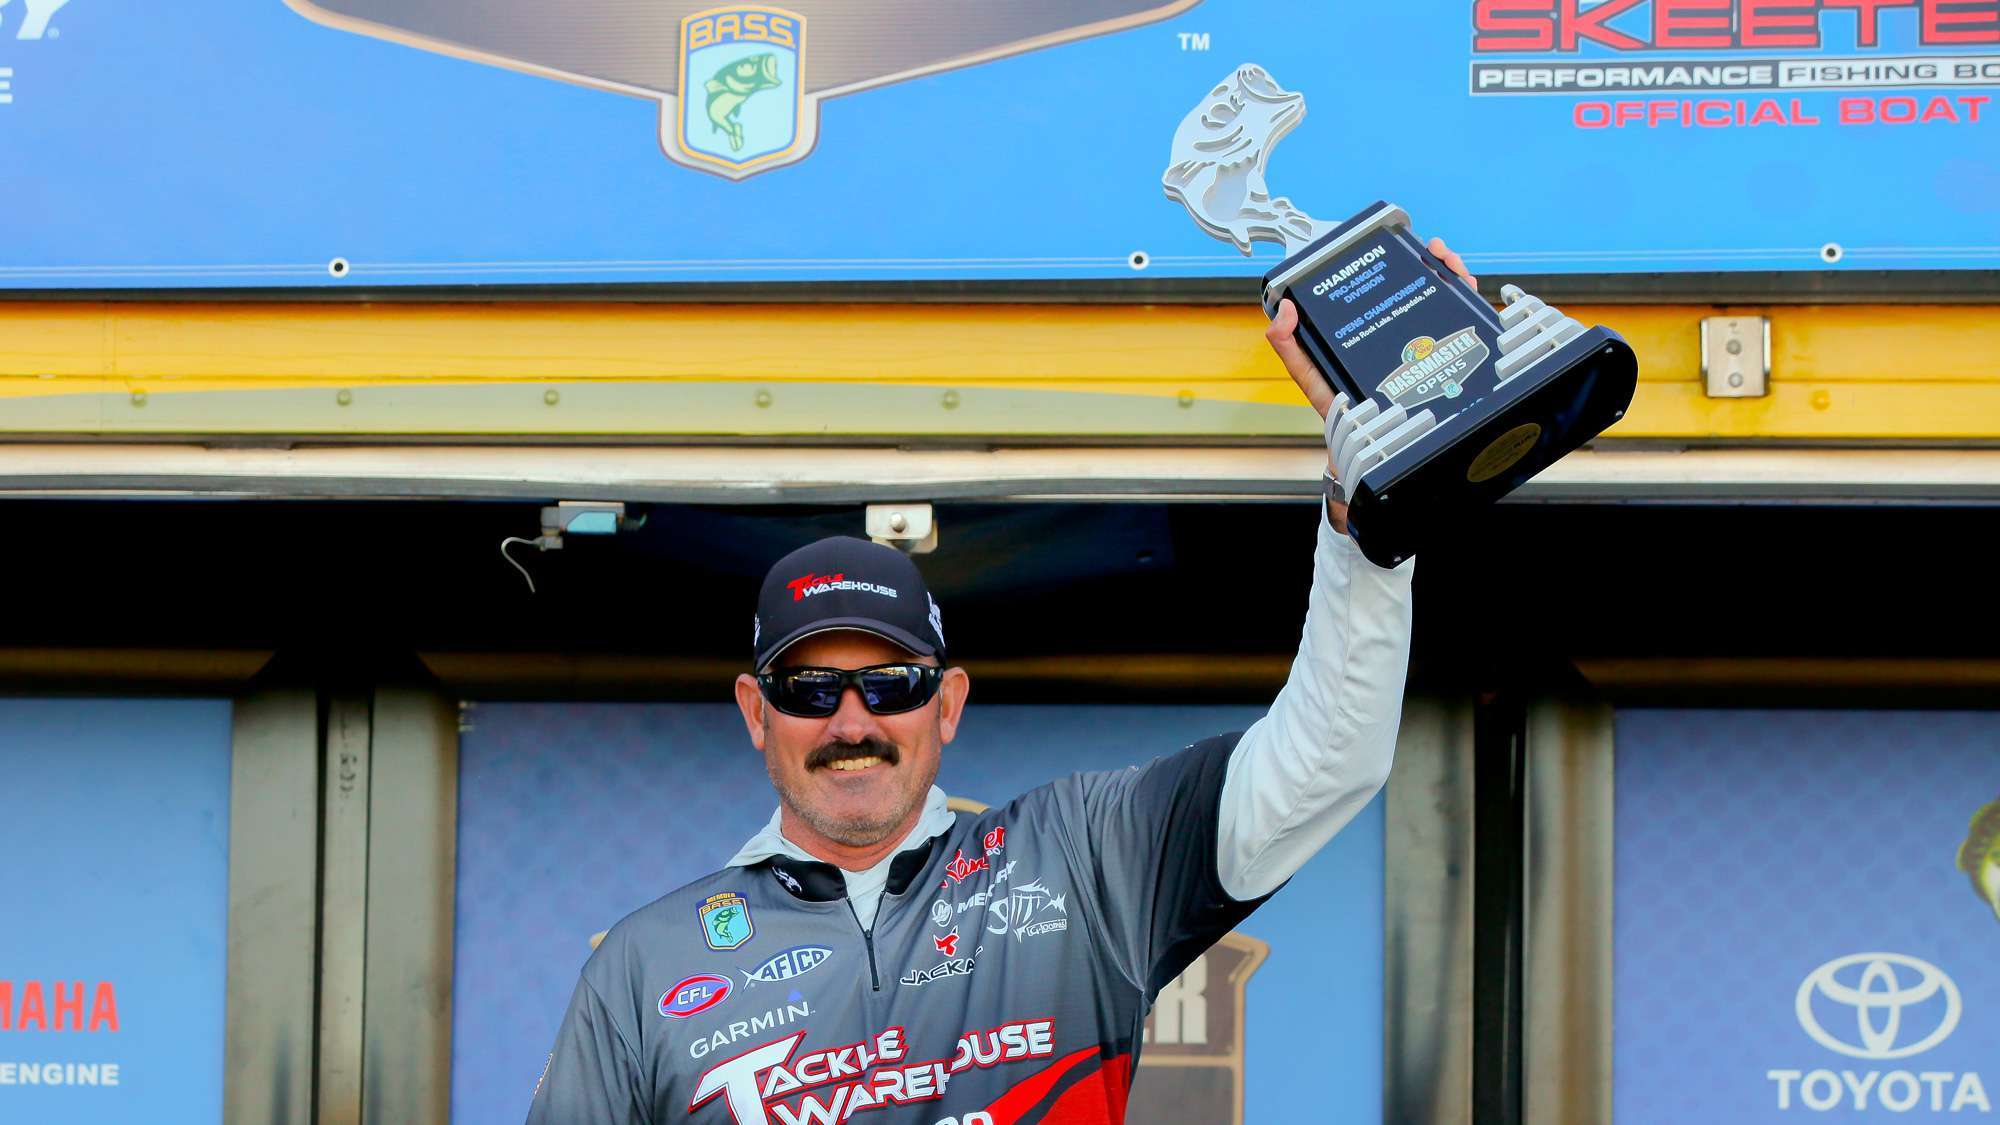 <b>Jared Lintner (50-1)</b><br>
Arroyo Grande, Calif. <br>
The big, soft-spoken guy from California has now fished 140 tournaments with B.A.S.S., and his last one â the Bassmaster Opens Championship on Table Rock Lake â resulted in his second tour win. Lintner had one of his best seasons last year, earning nine paychecks and topping the $1 million mark for career earnings.
